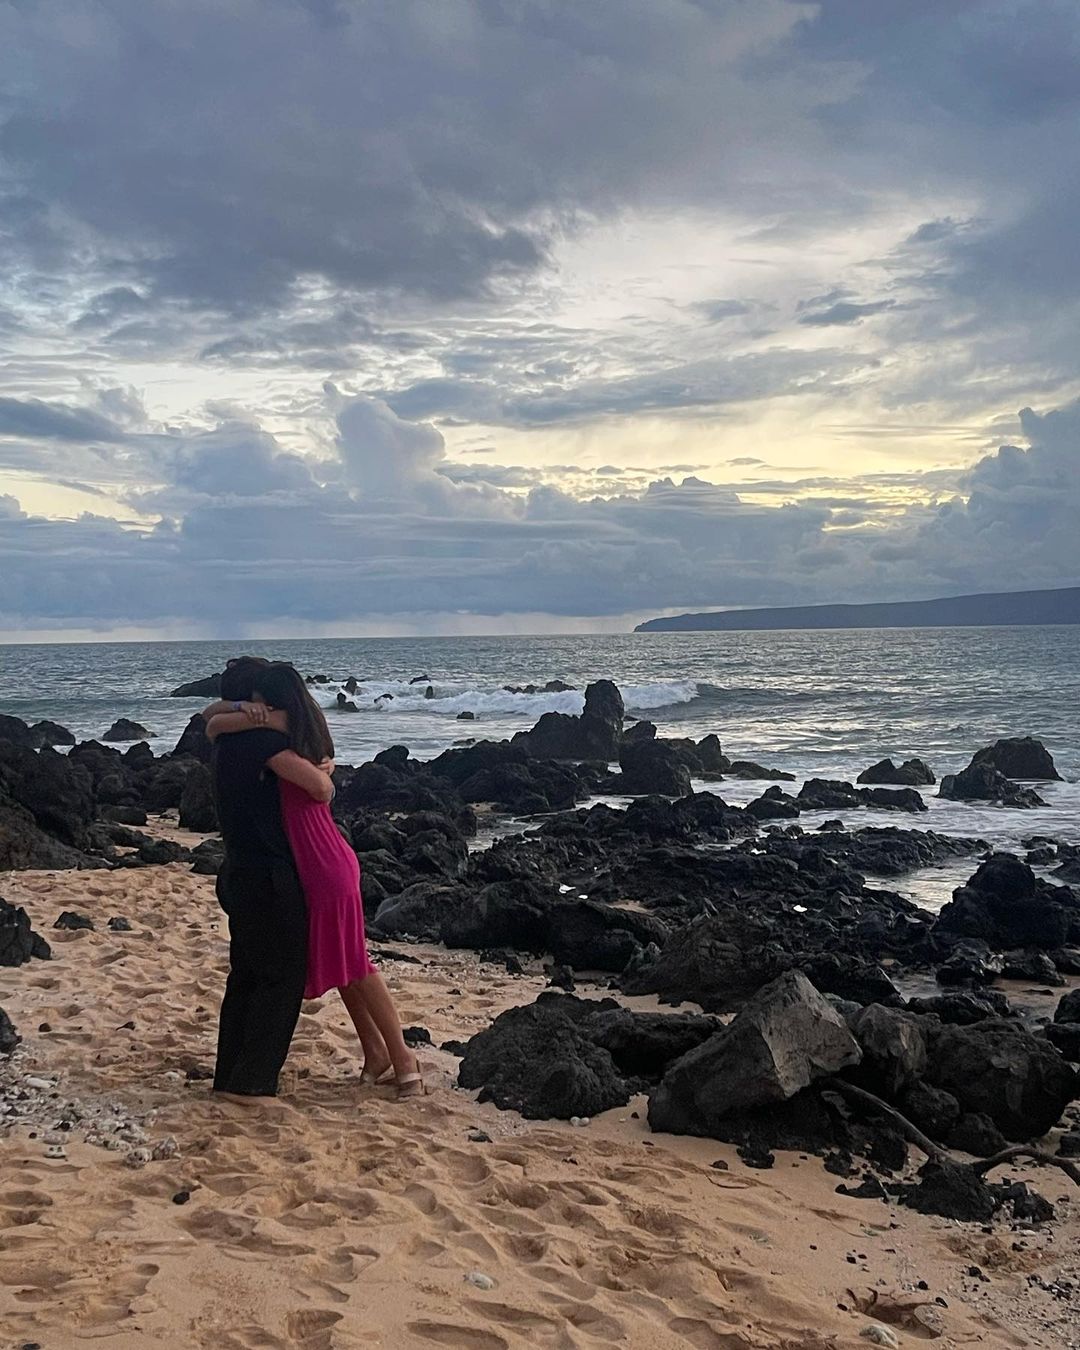 Rory Gibson and Alicia Ruelas hugging in the beach of Hawaii